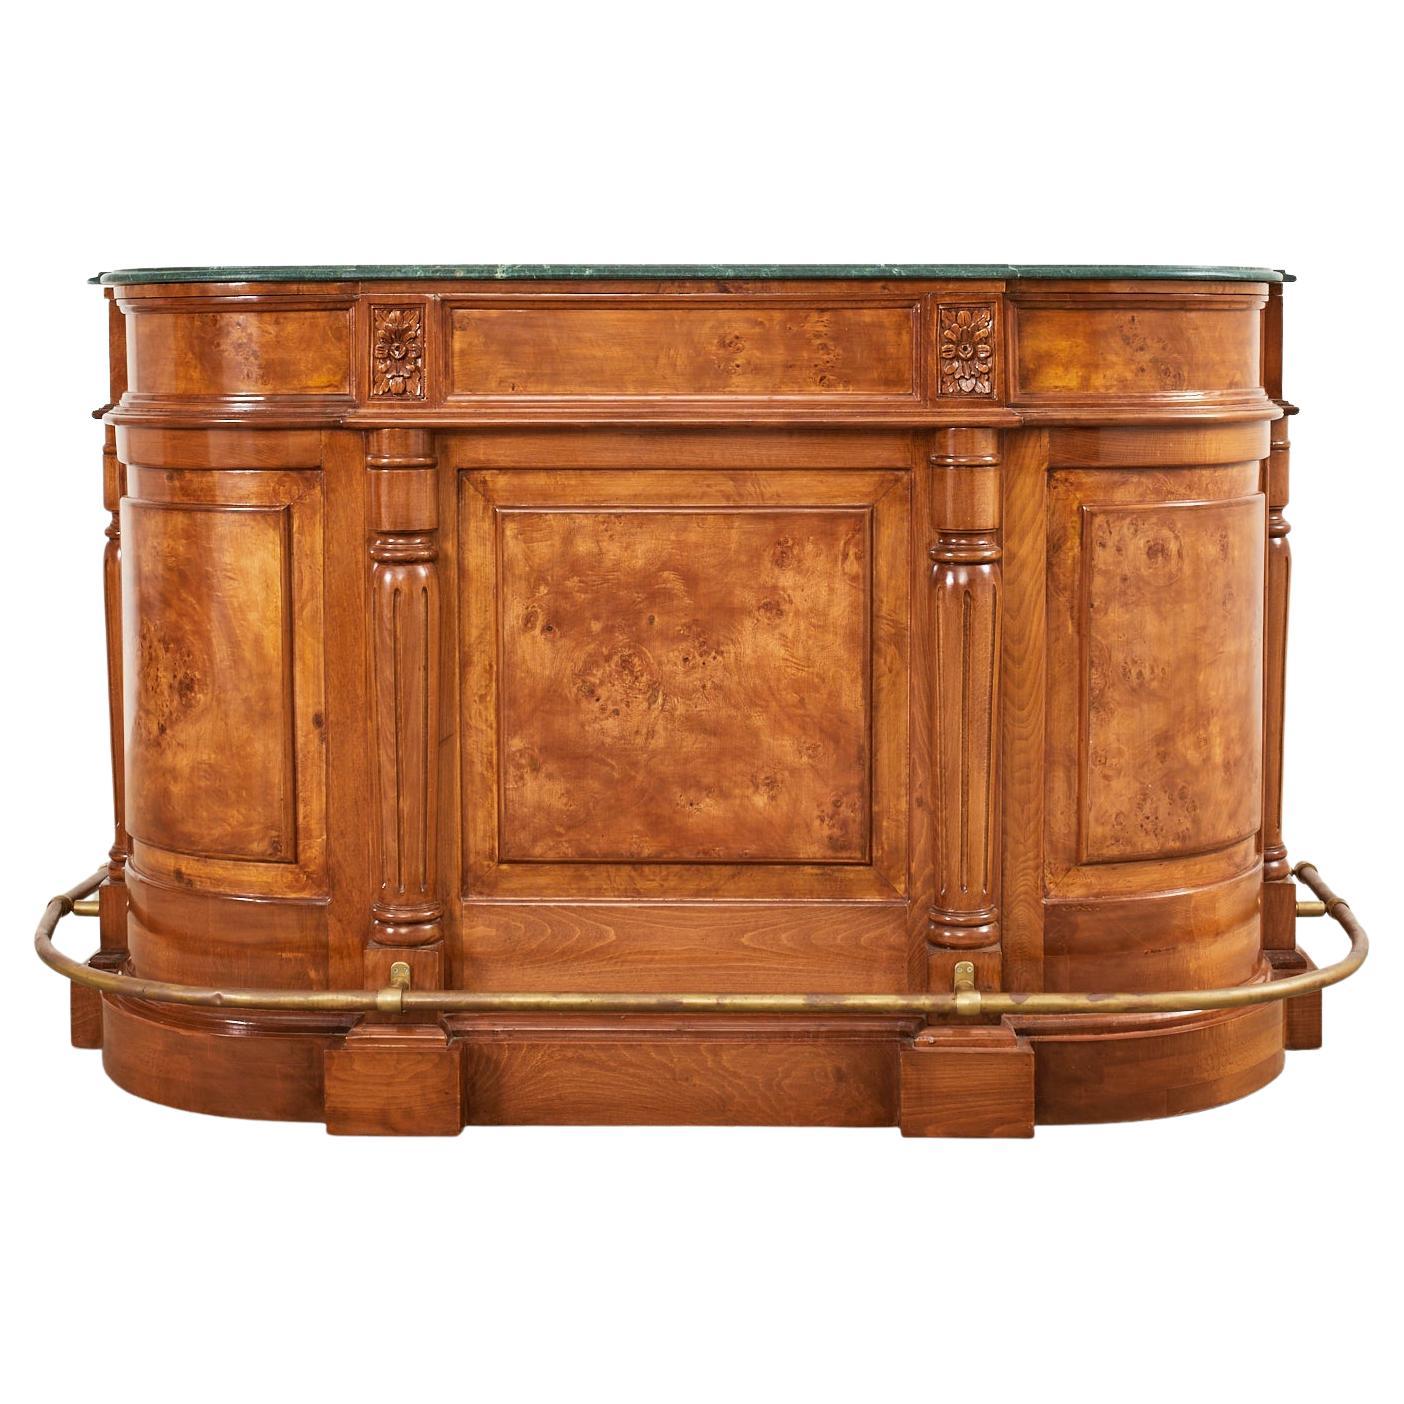 English Neoclassical Style Marble Top Demilune Dry Bar